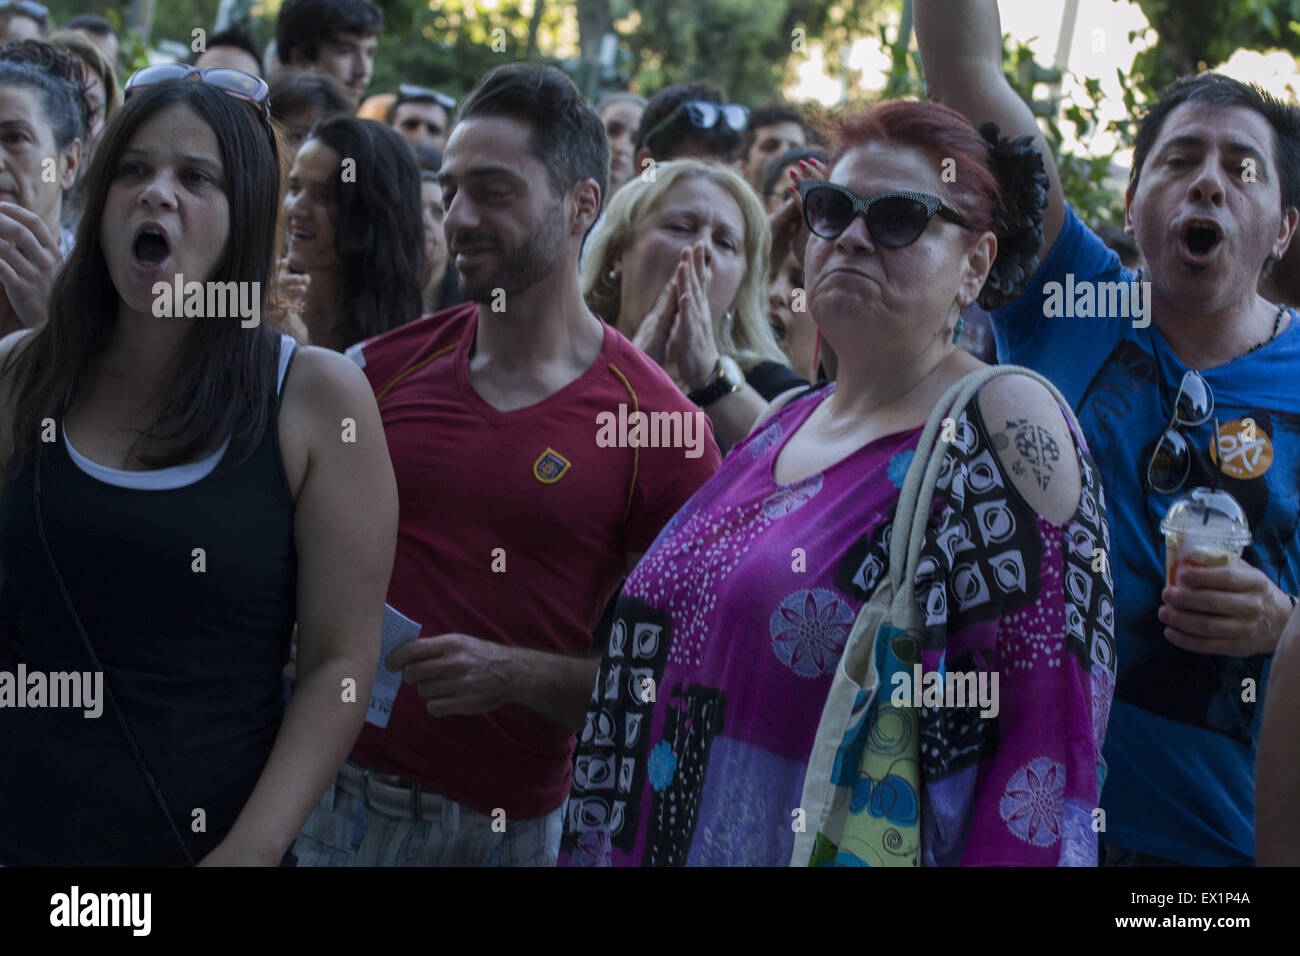 Athens, Greece. 4th July, 2015. Protesters shout slogans against Greek media accusing them of propaganda in favor of the Yes vote on the upcoming referendum. Greece is ranked No 91 out of 180 countries in the World Press Freedom Index, while all mainstream TV channels are owned by Greek tycoons. Credit:  Nikolas Georgiou/ZUMA Wire/ZUMAPRESS.com/Alamy Live News Stock Photo